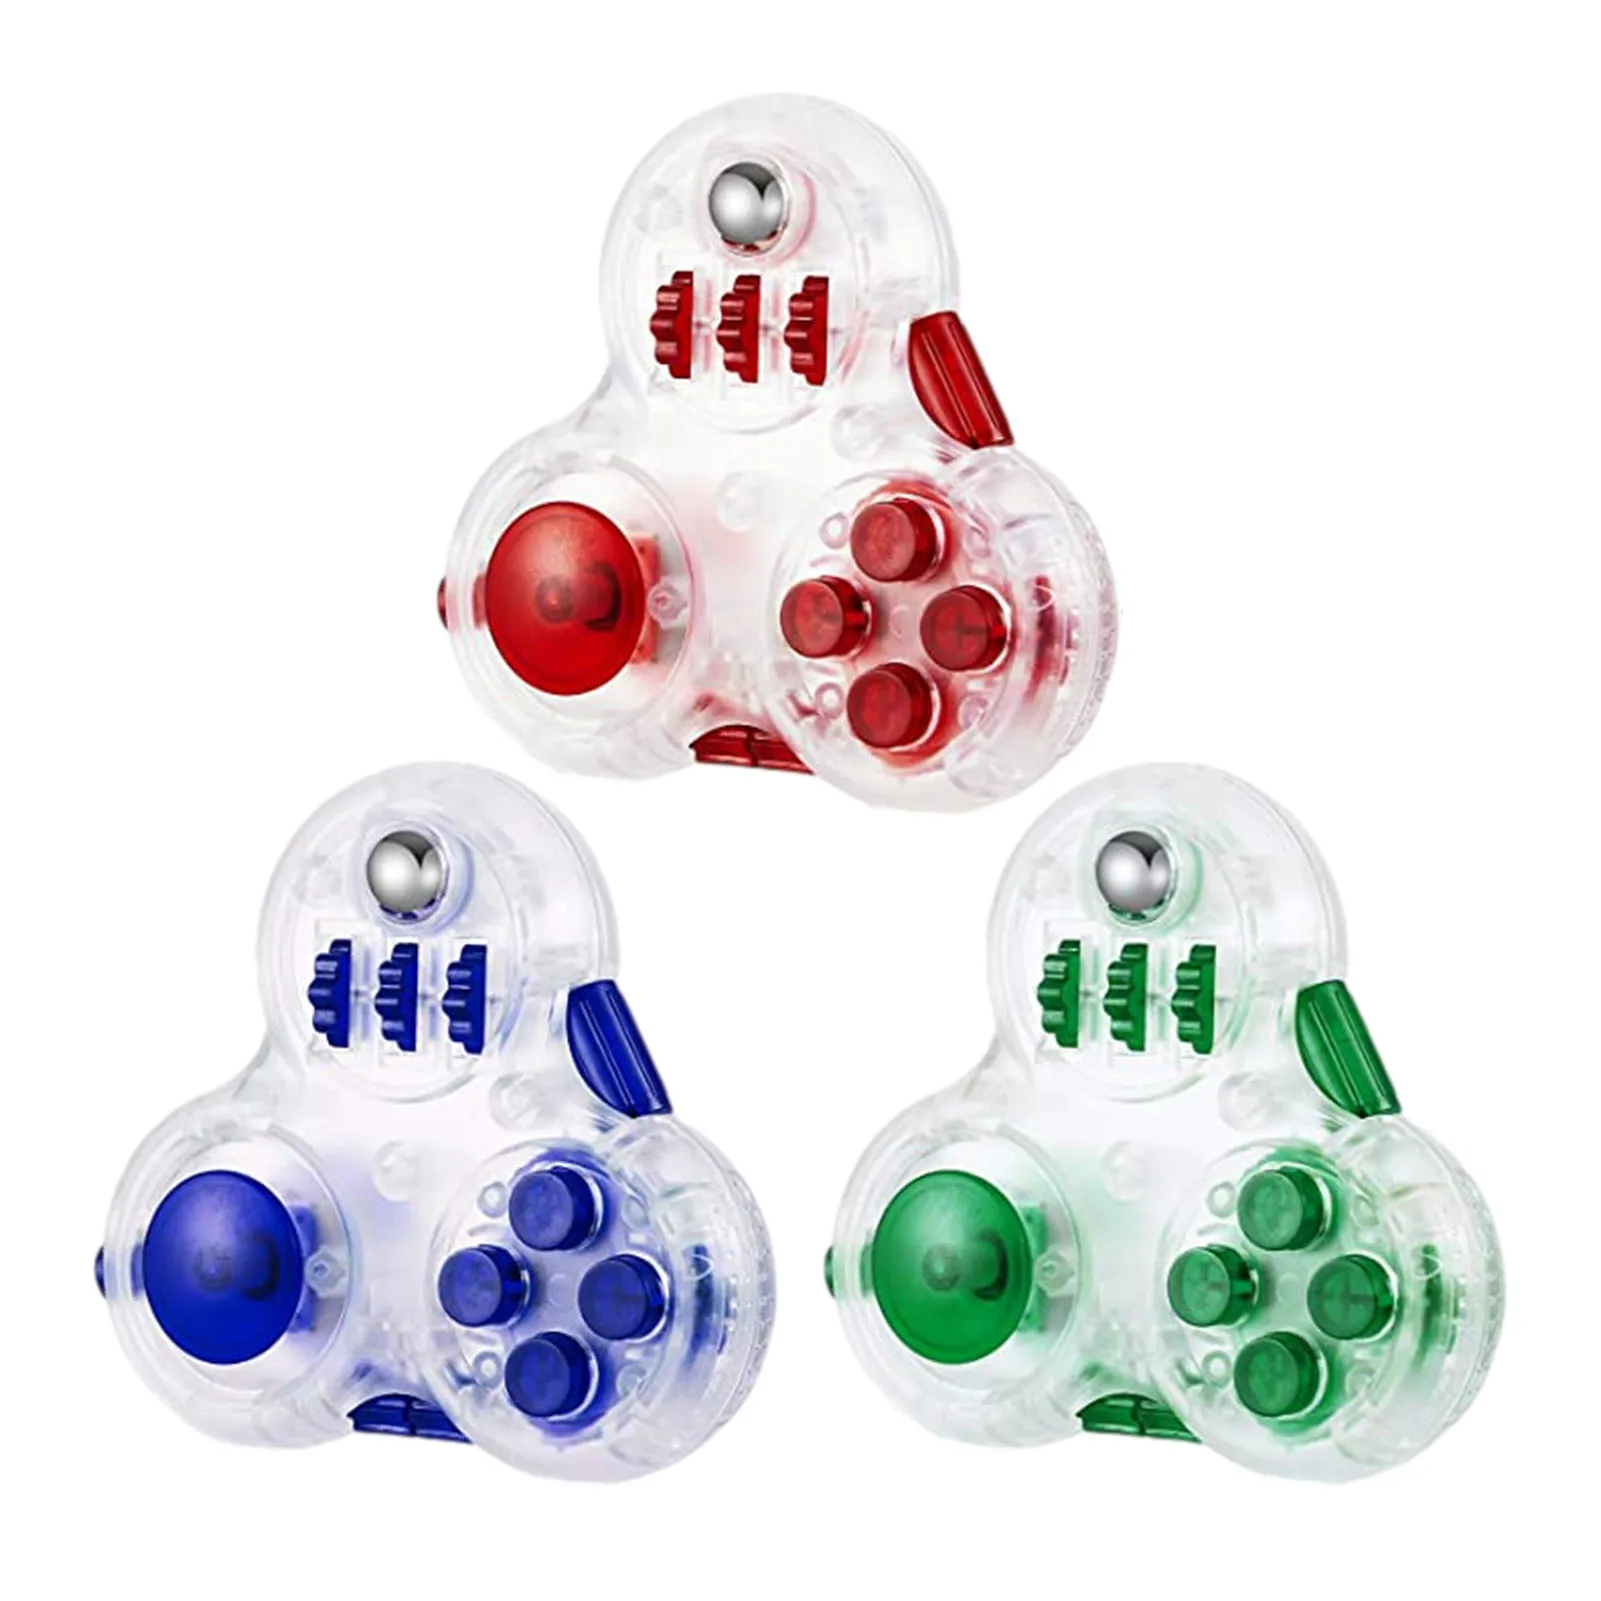 

Fidget Stress Reliever Dice Decompression Fidget Pad Toy With 10 Fidget Features Toys For Children ADHD Needs